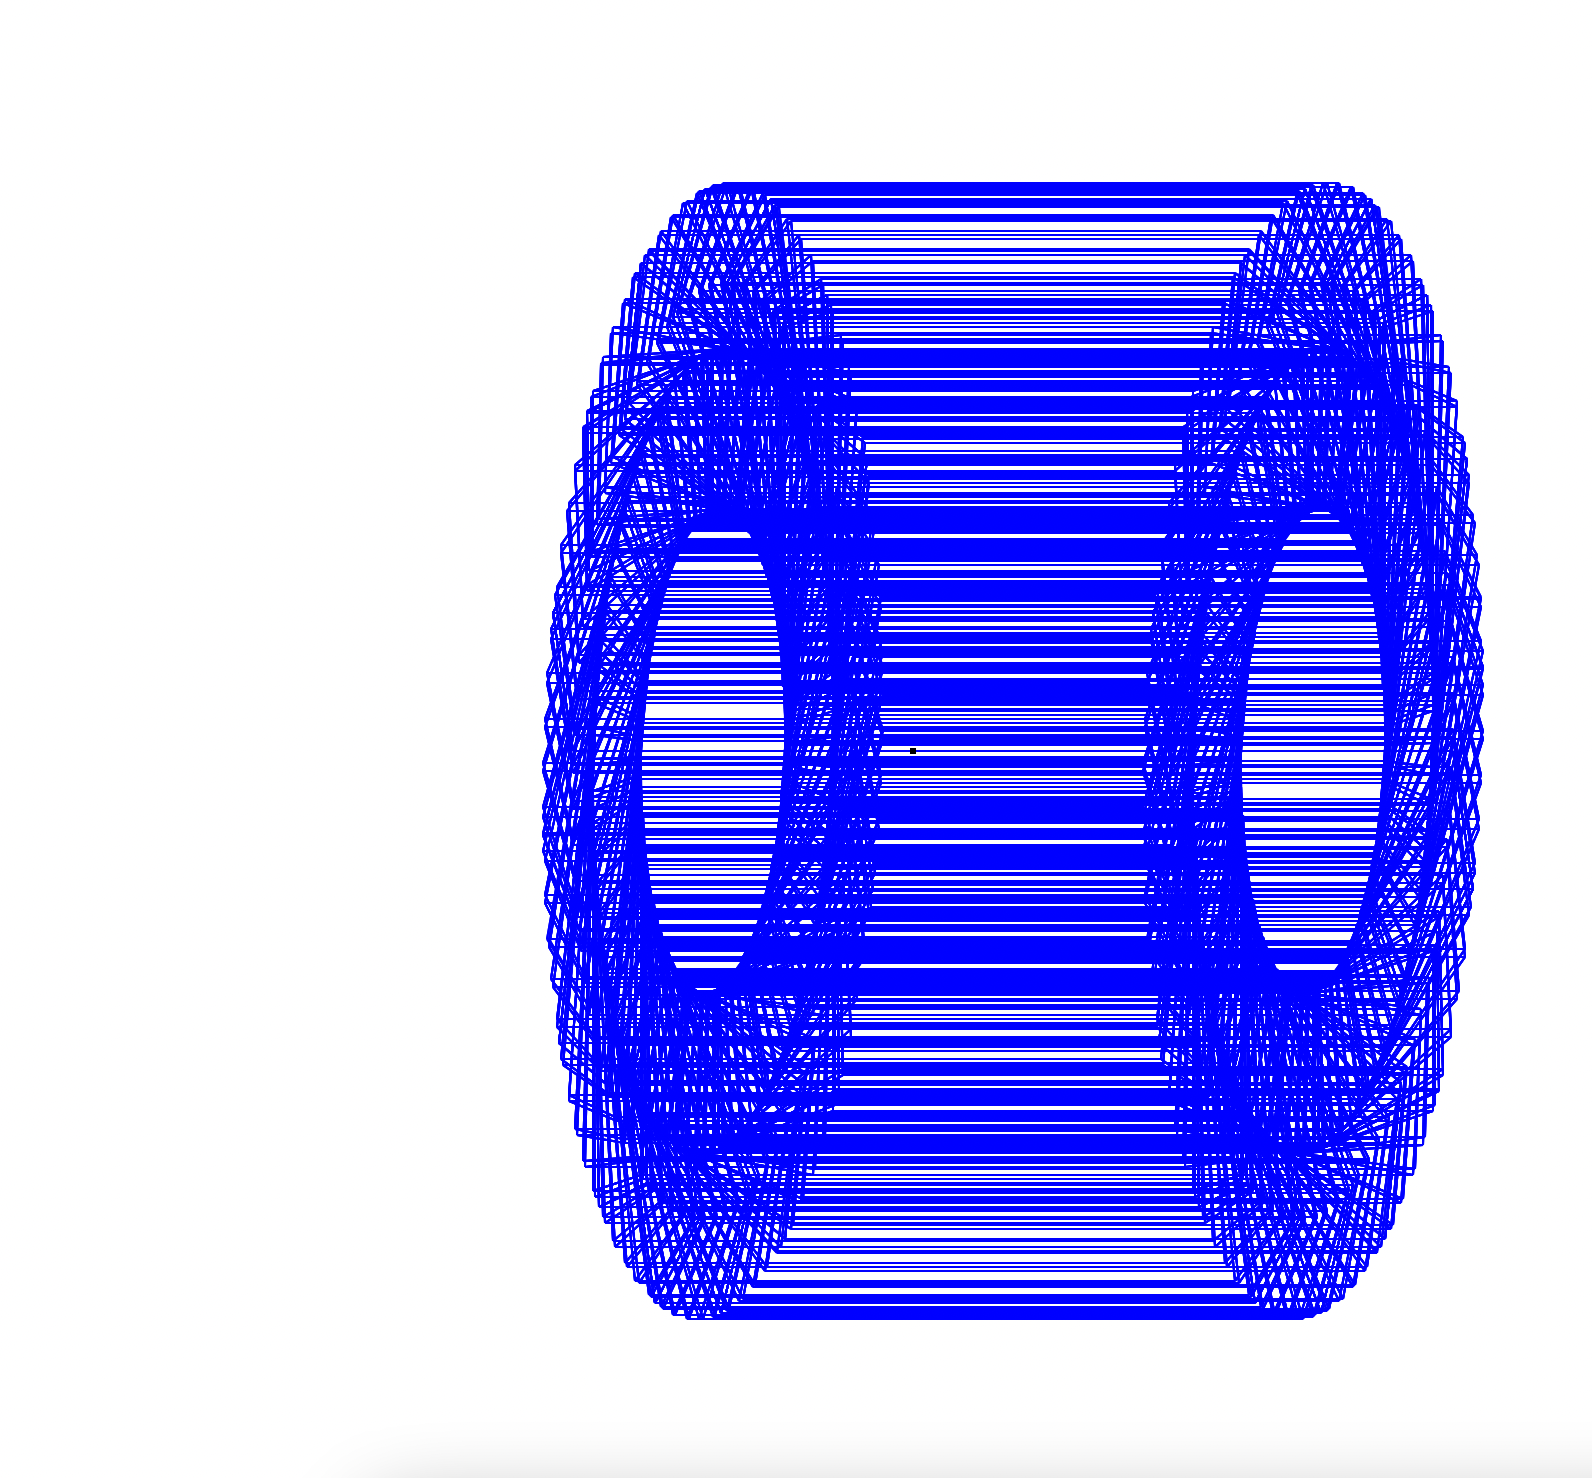 A similar cuboid being rotated many times in 3D, so it creates a cylinder shape.